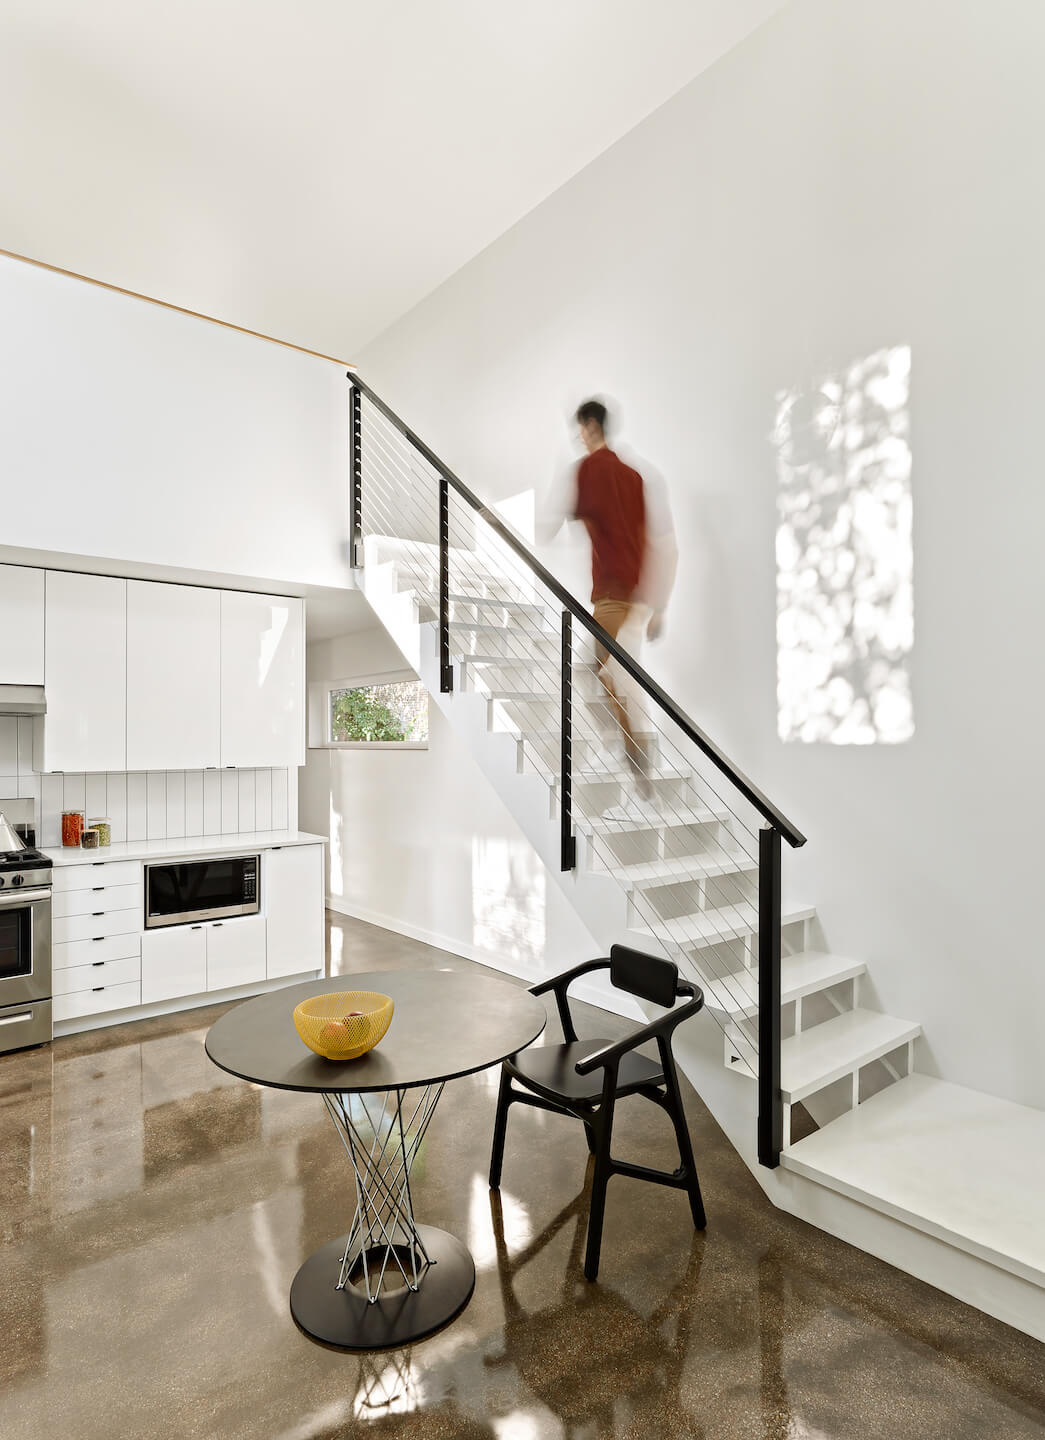 view of a contemporary open kitchen space with a man ascending a staircase